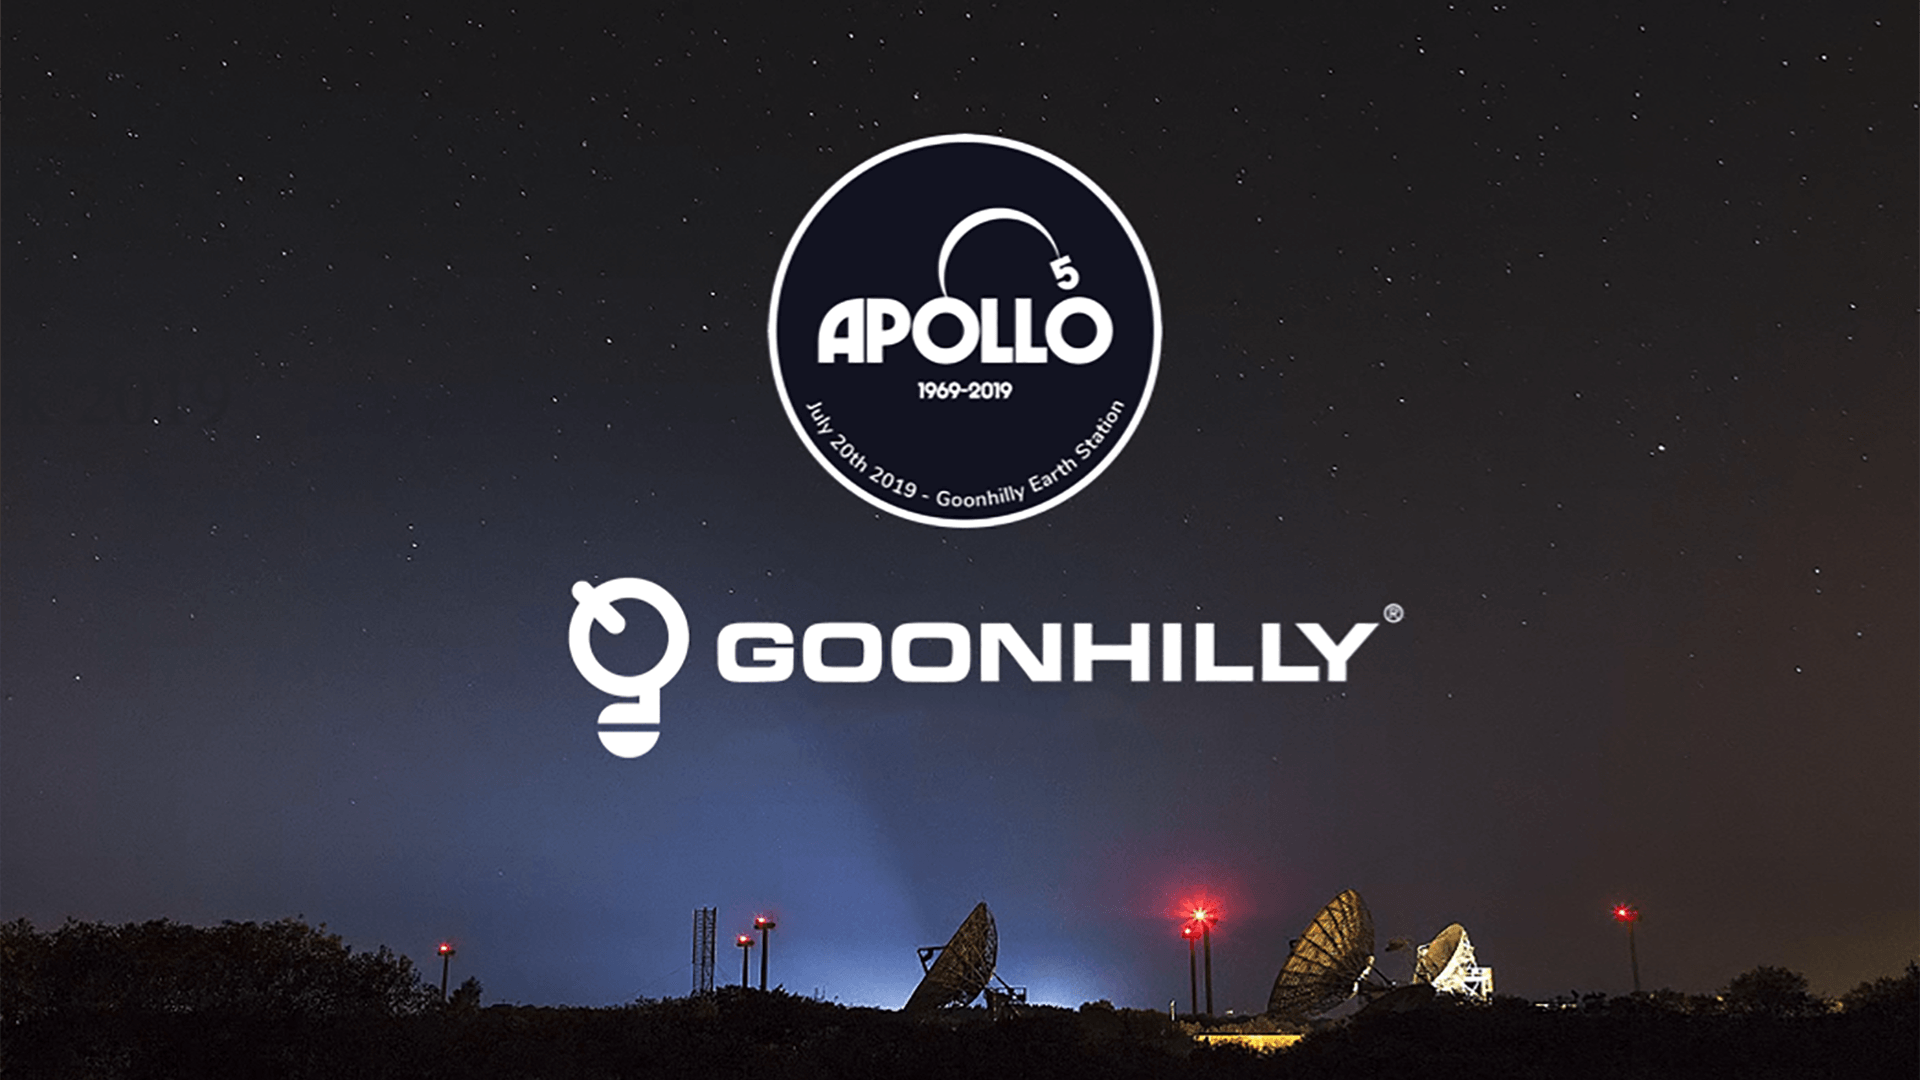 Goonhilly's celebrations of Apollo 50th First Man on the Moon event